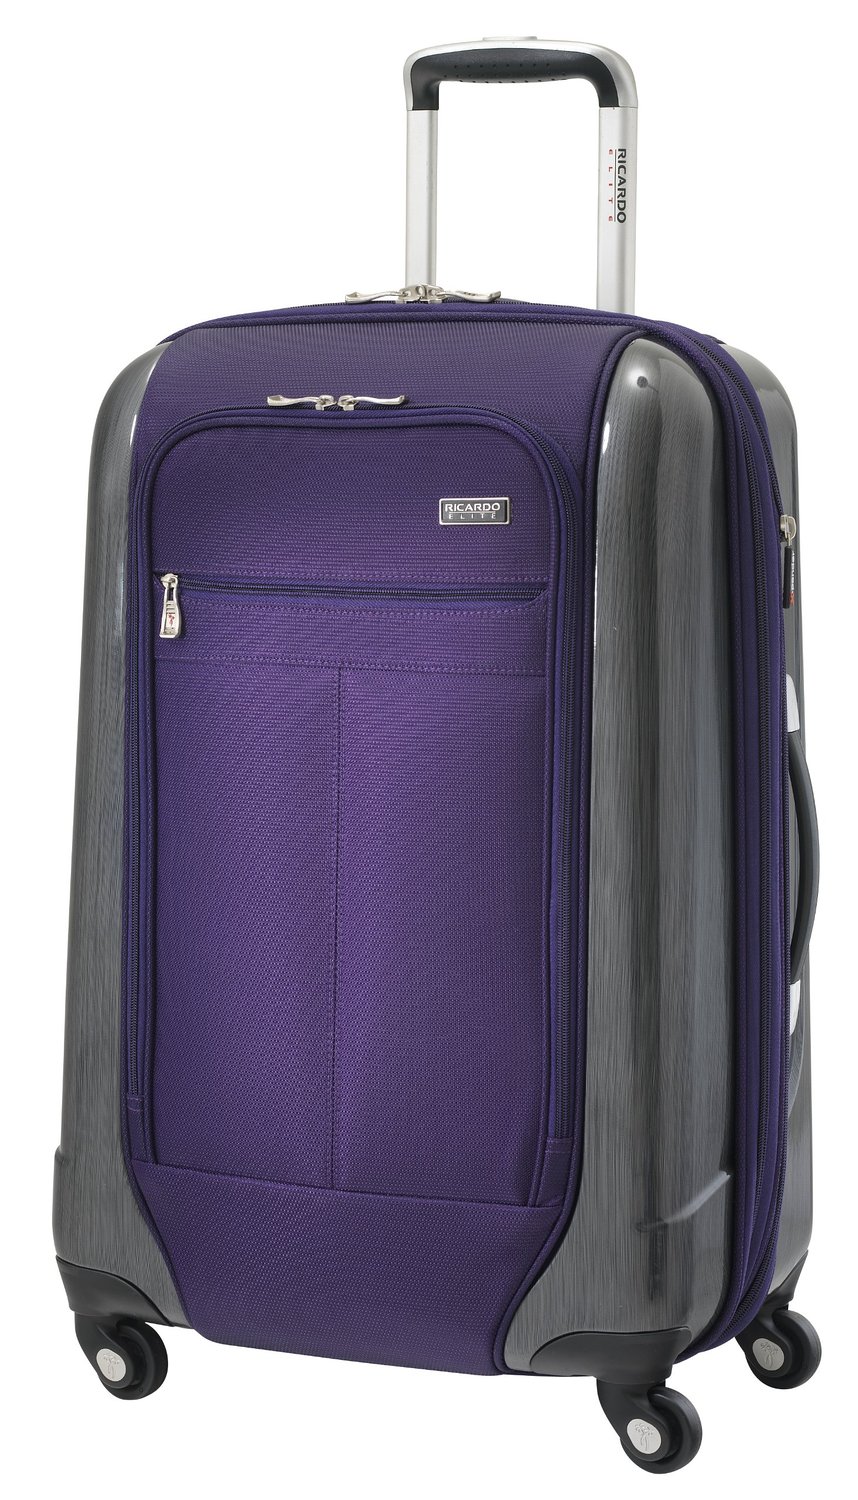 Ricardo Beverly Hills Luggage Crystal City 24 Inch Expandable Spinner Upright Suitcase